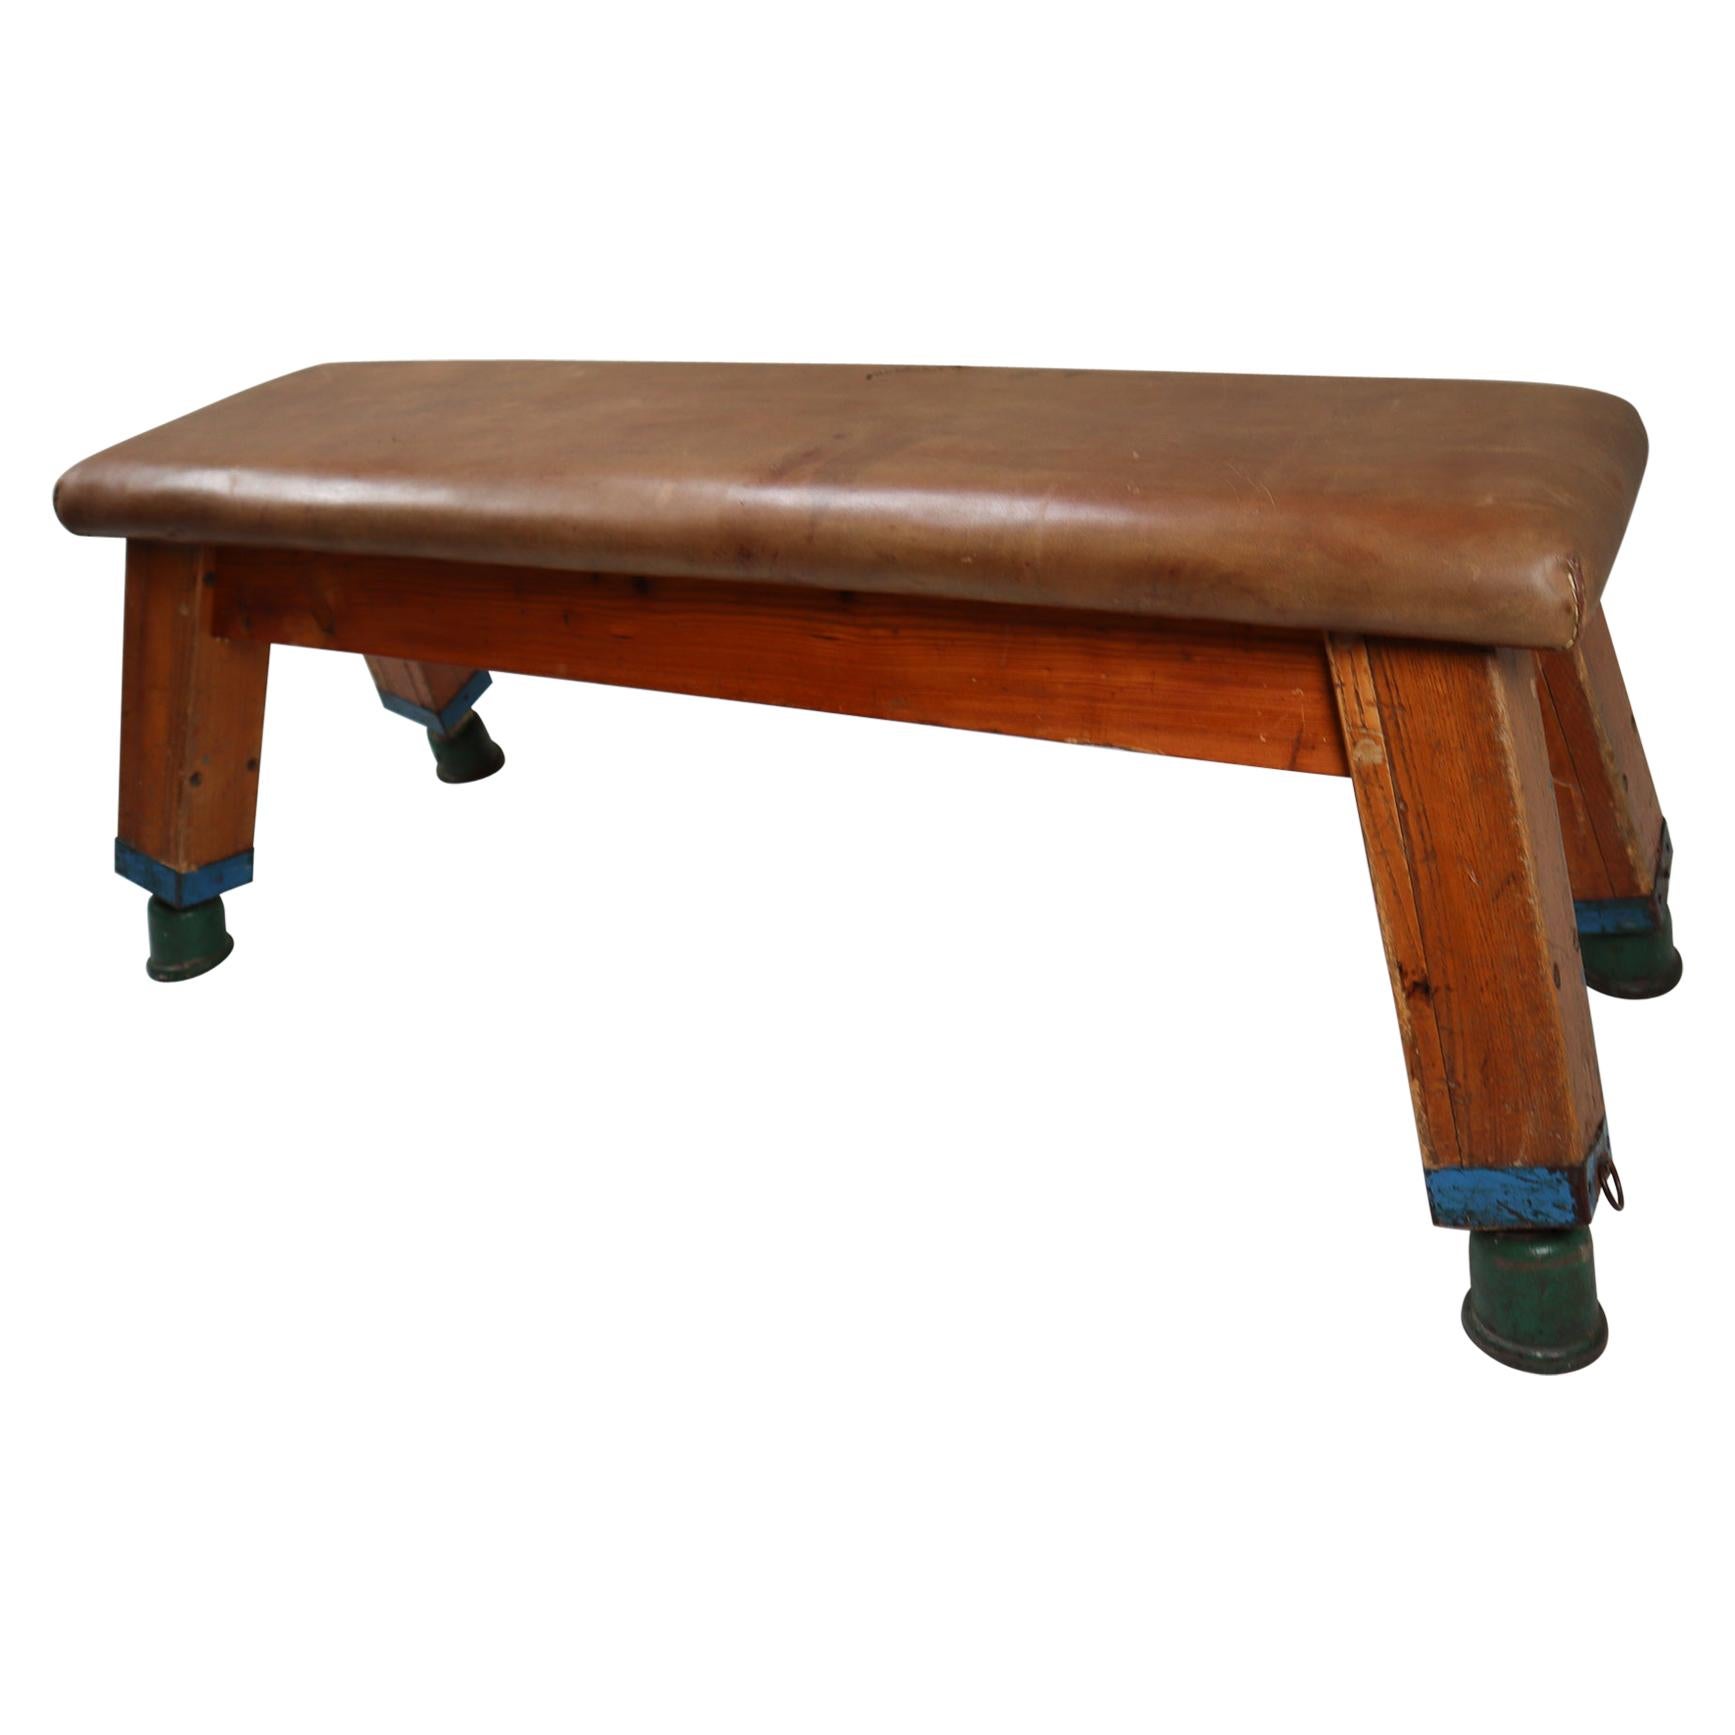 European Vintage Patinated Leather Gym Bench or Table, circa 1950s